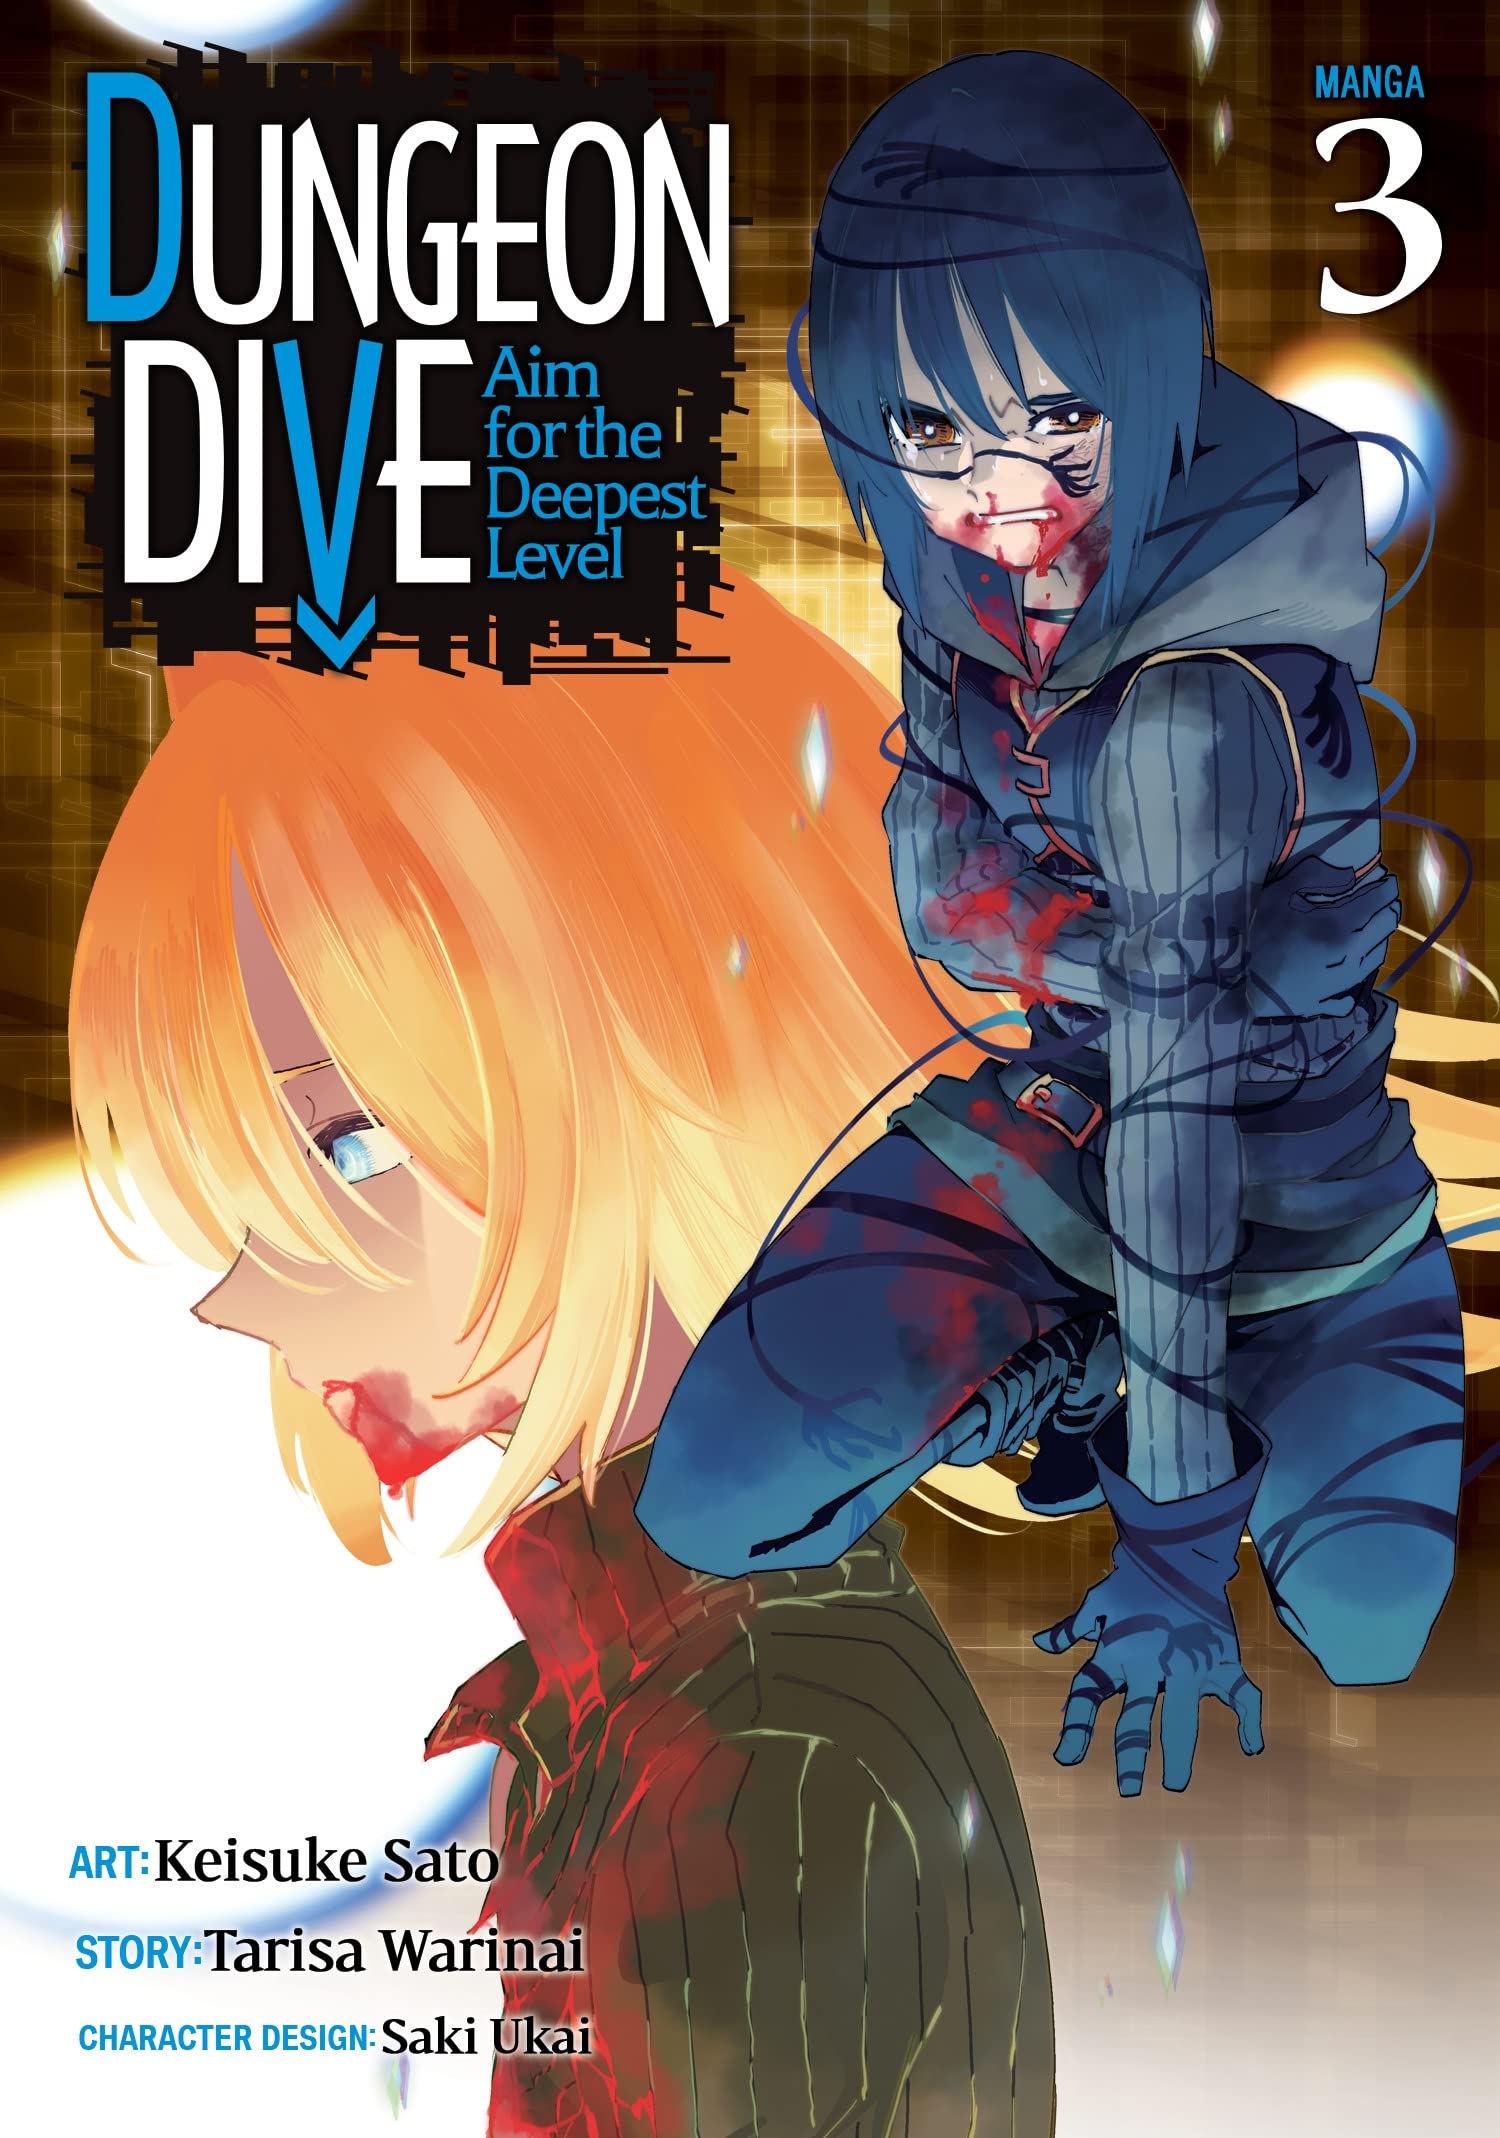 DUNGEON DIVE: Aim for the Deepest Level - Volume 3 | Tarisa Warinai